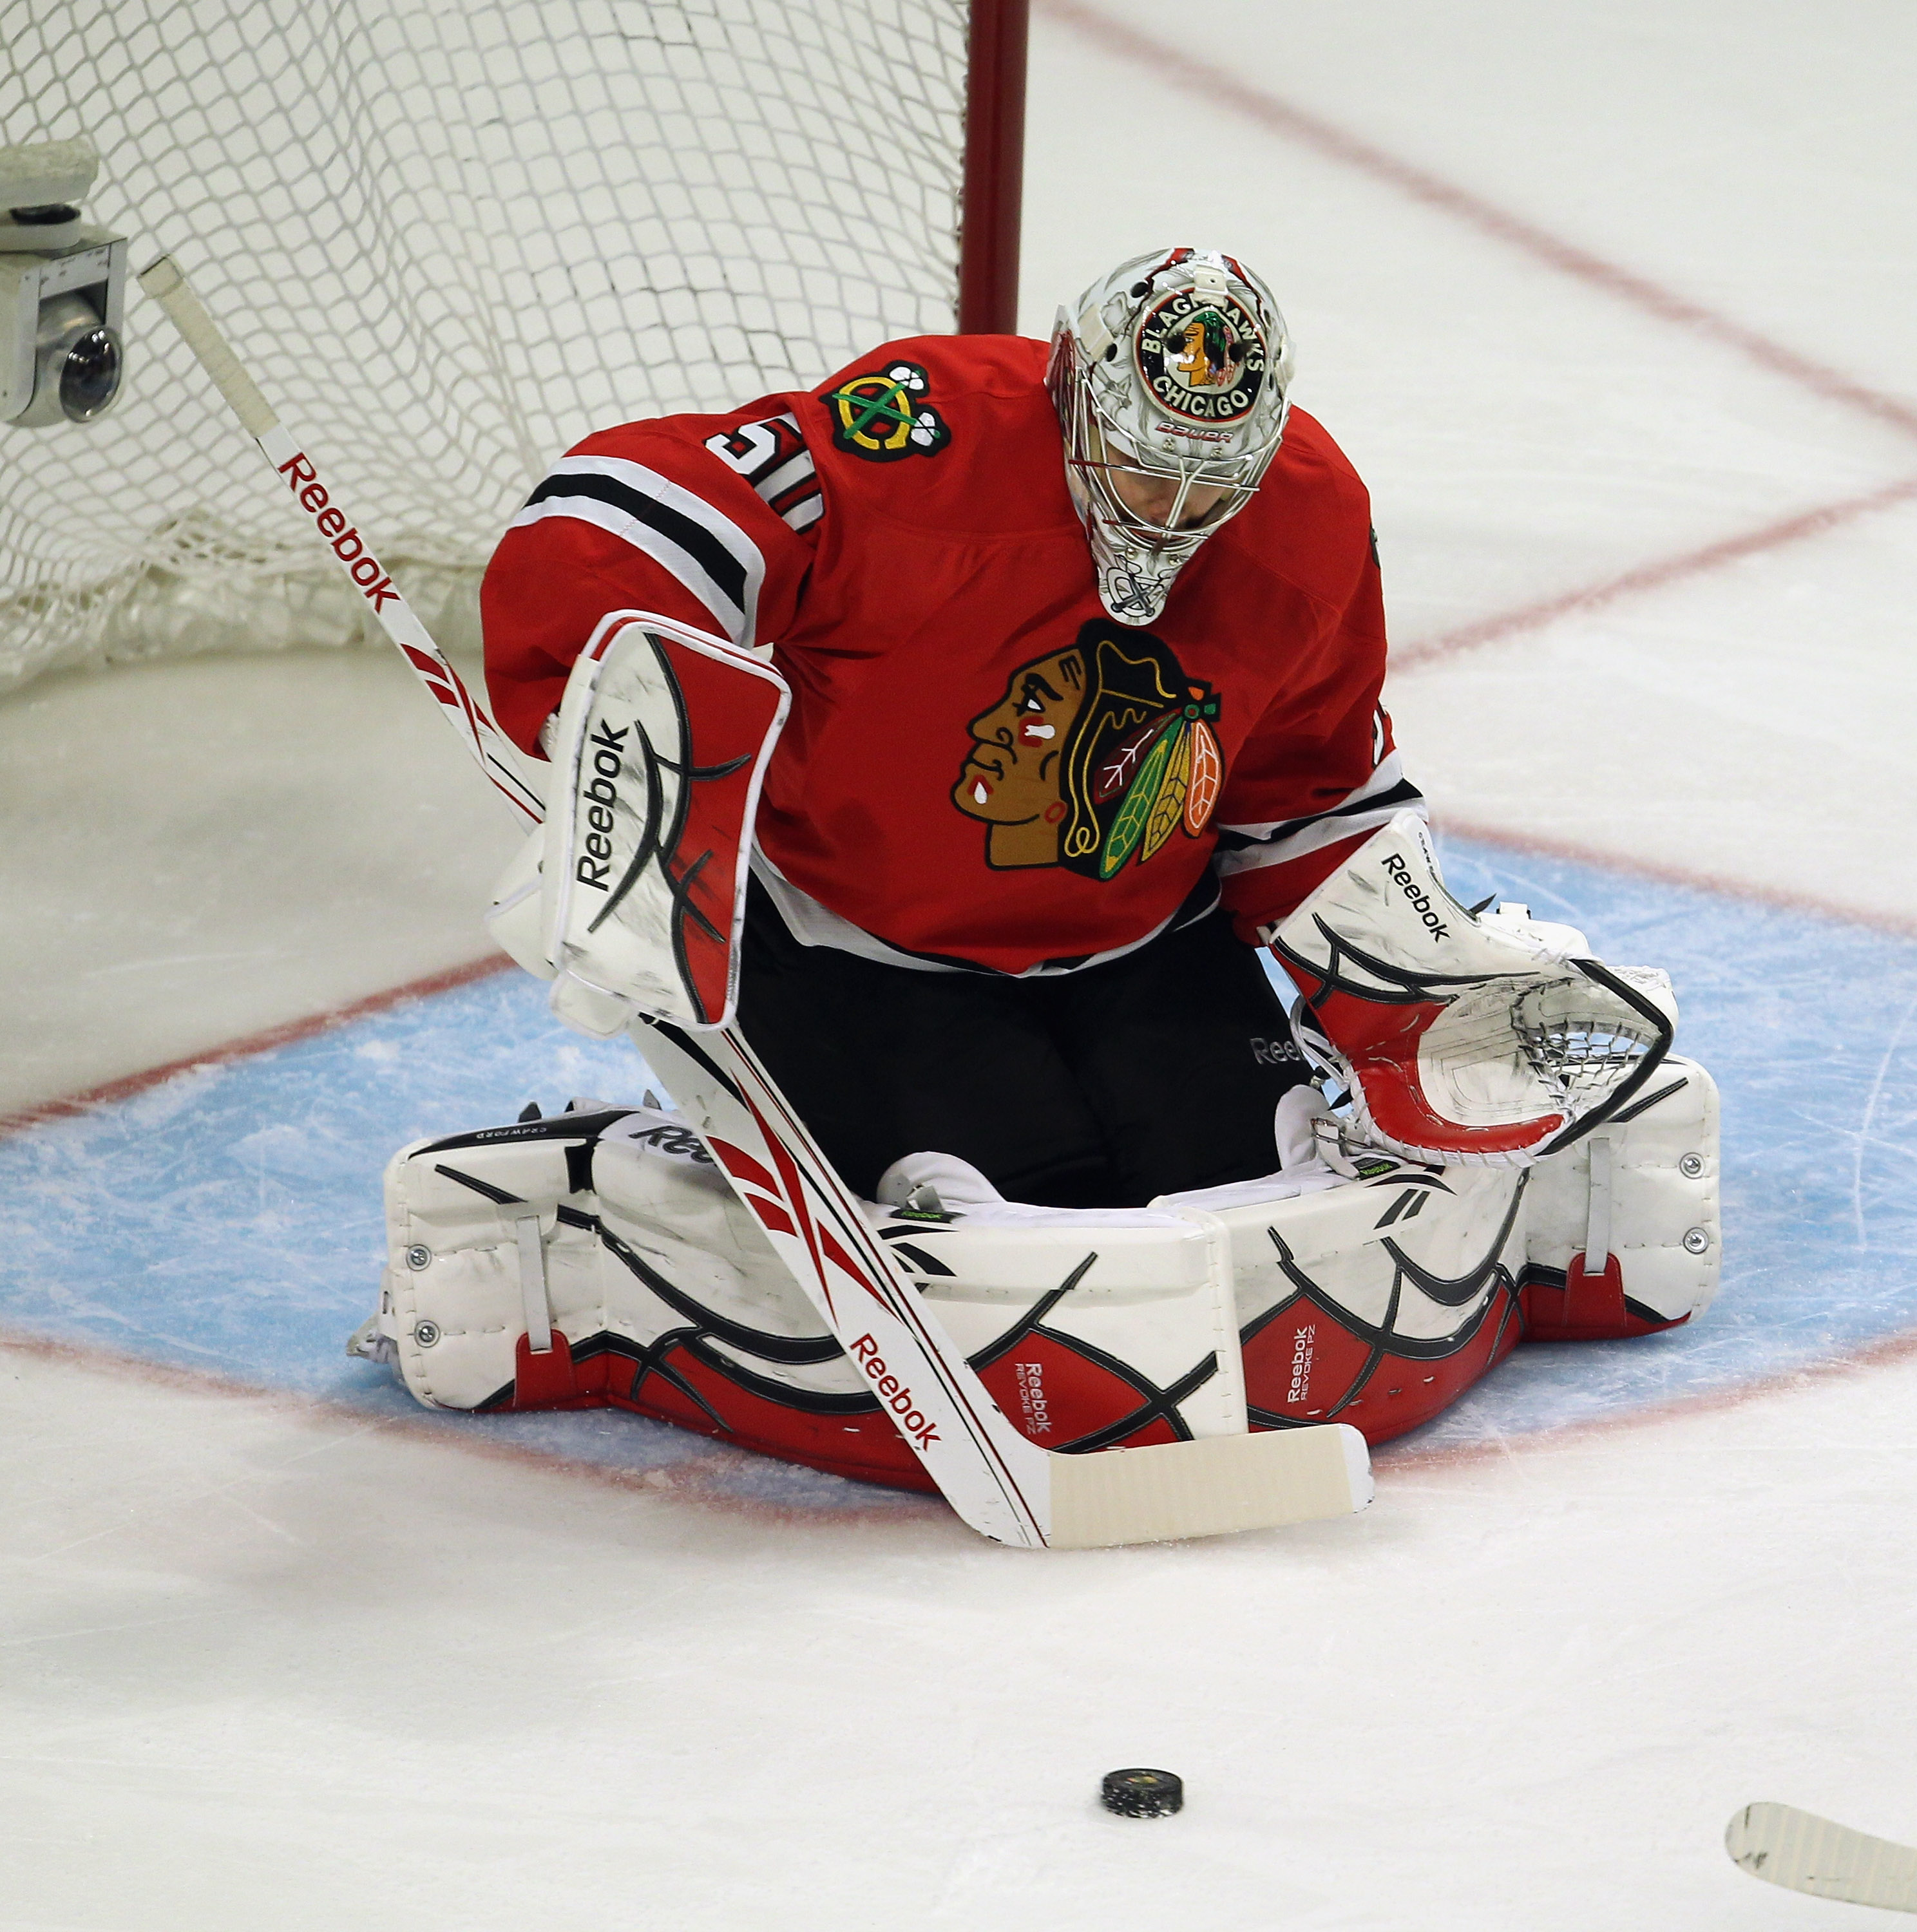 Does Blackhawks goalie Corey Crawford have a case for the Hall of